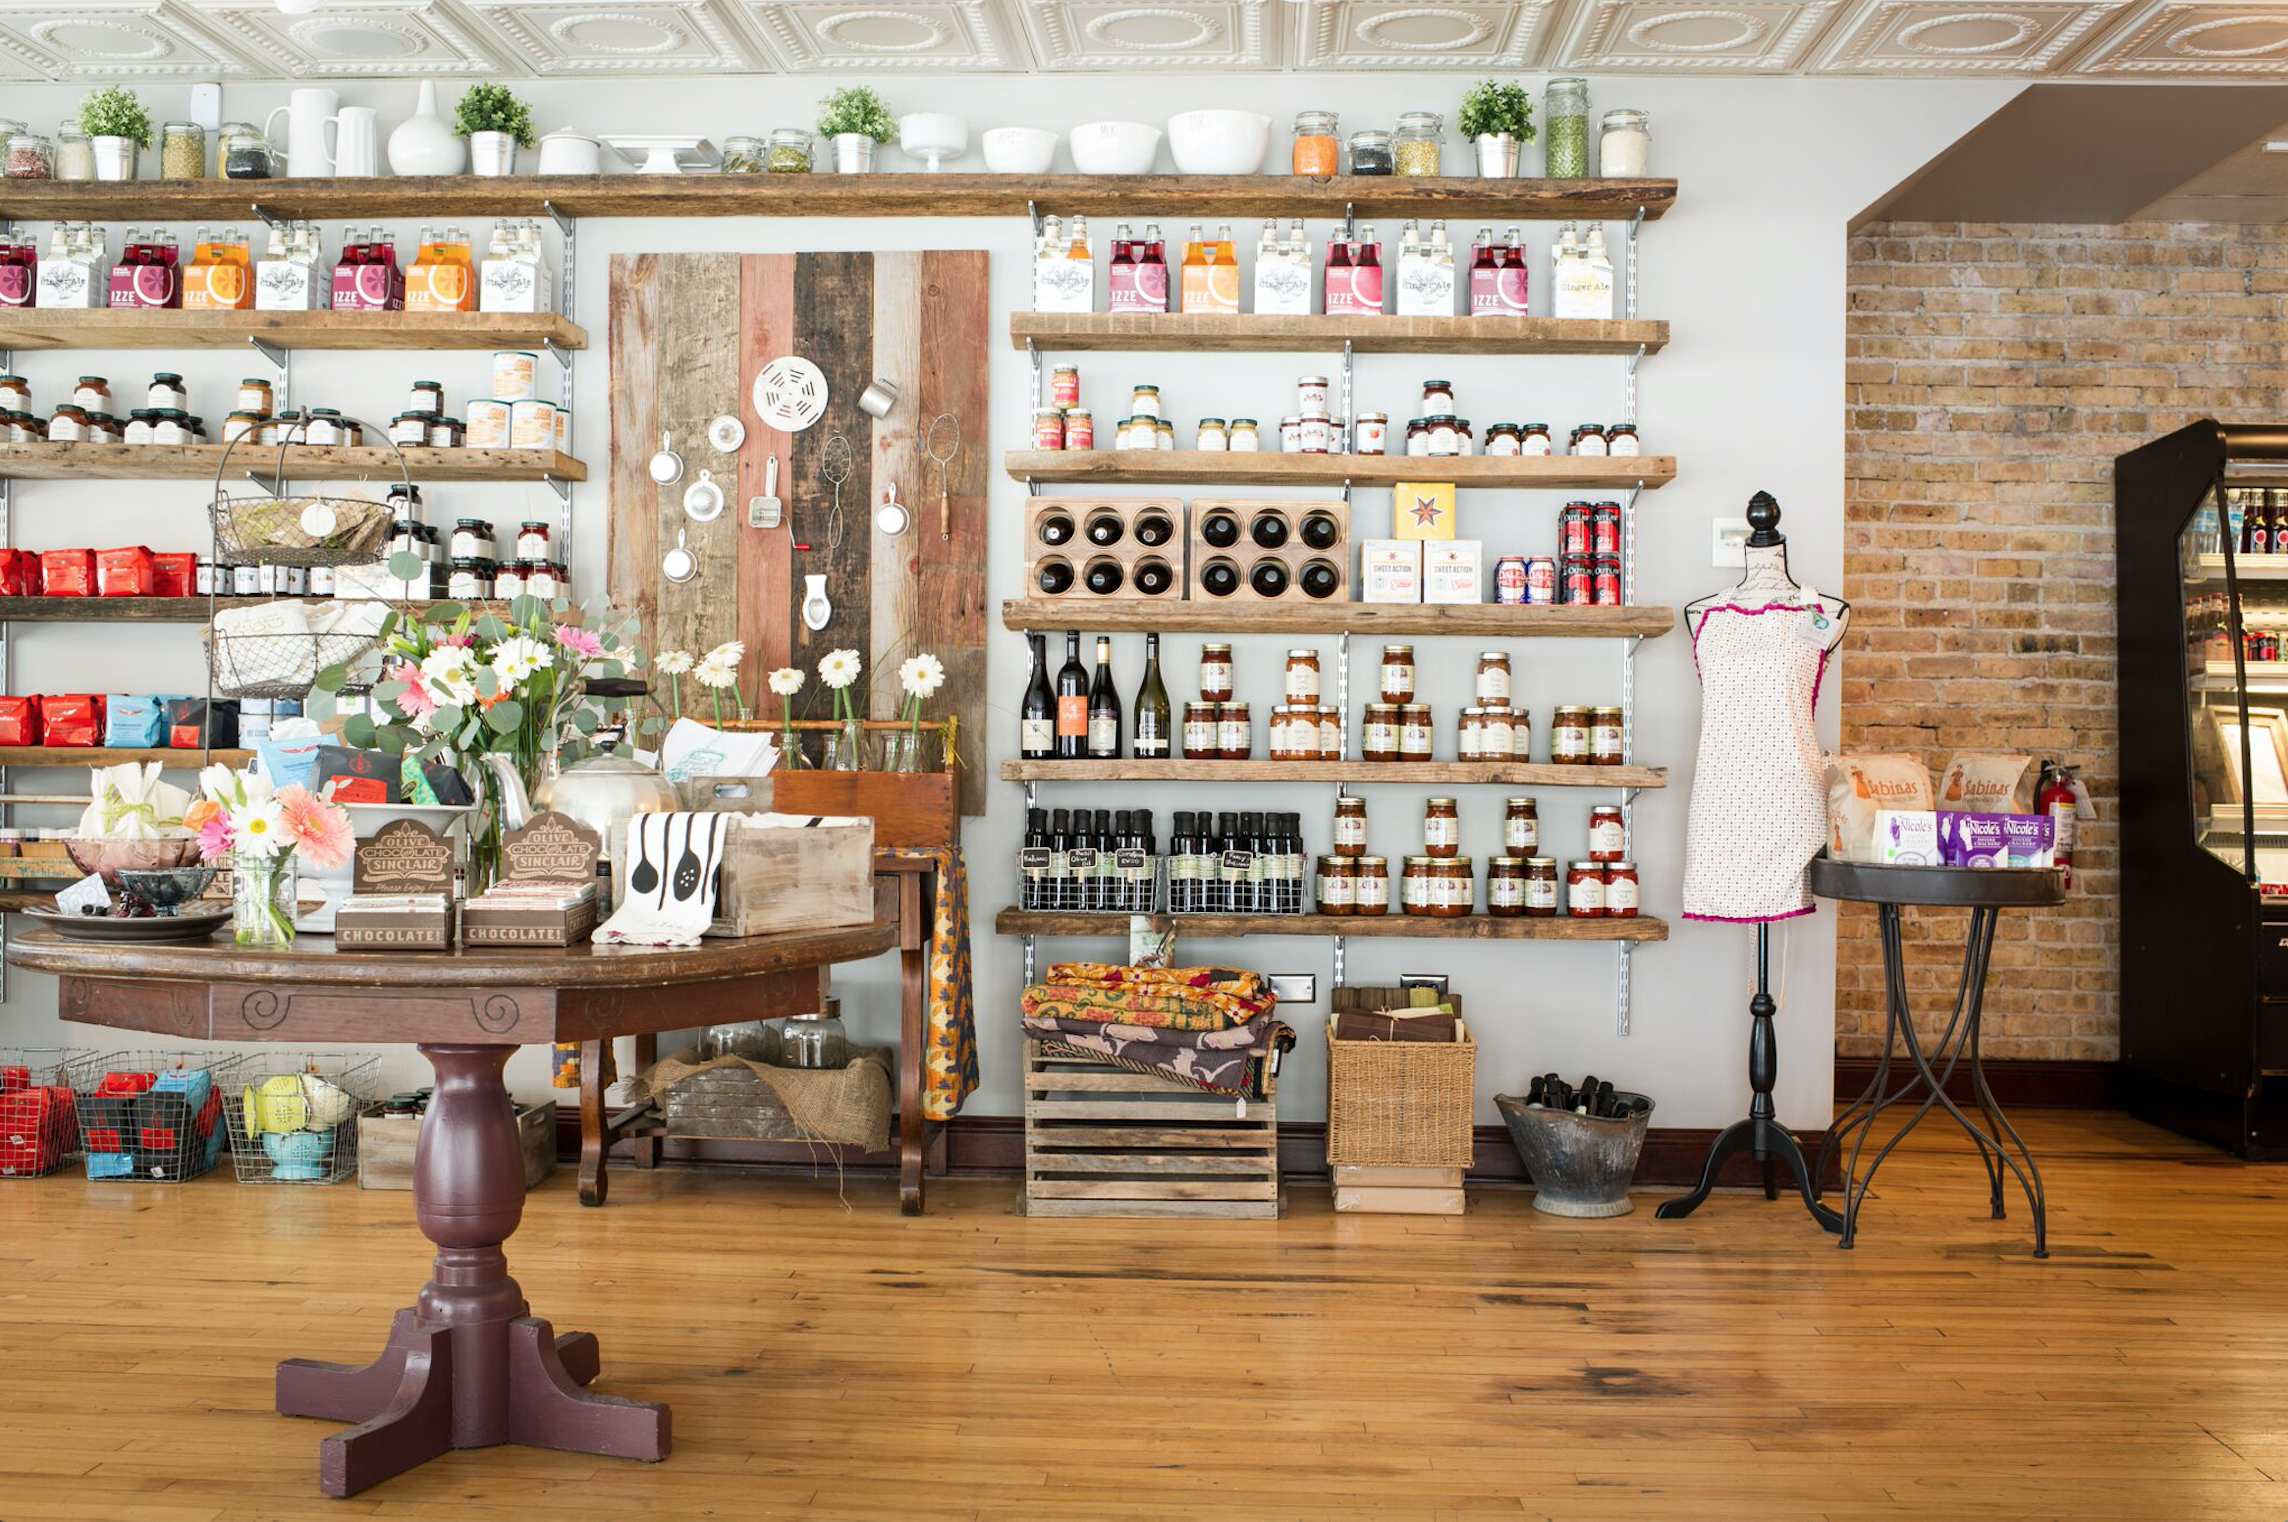 Vintage shelves and table with barn wood welcome market guests at this Glen Ellyn restaurant.